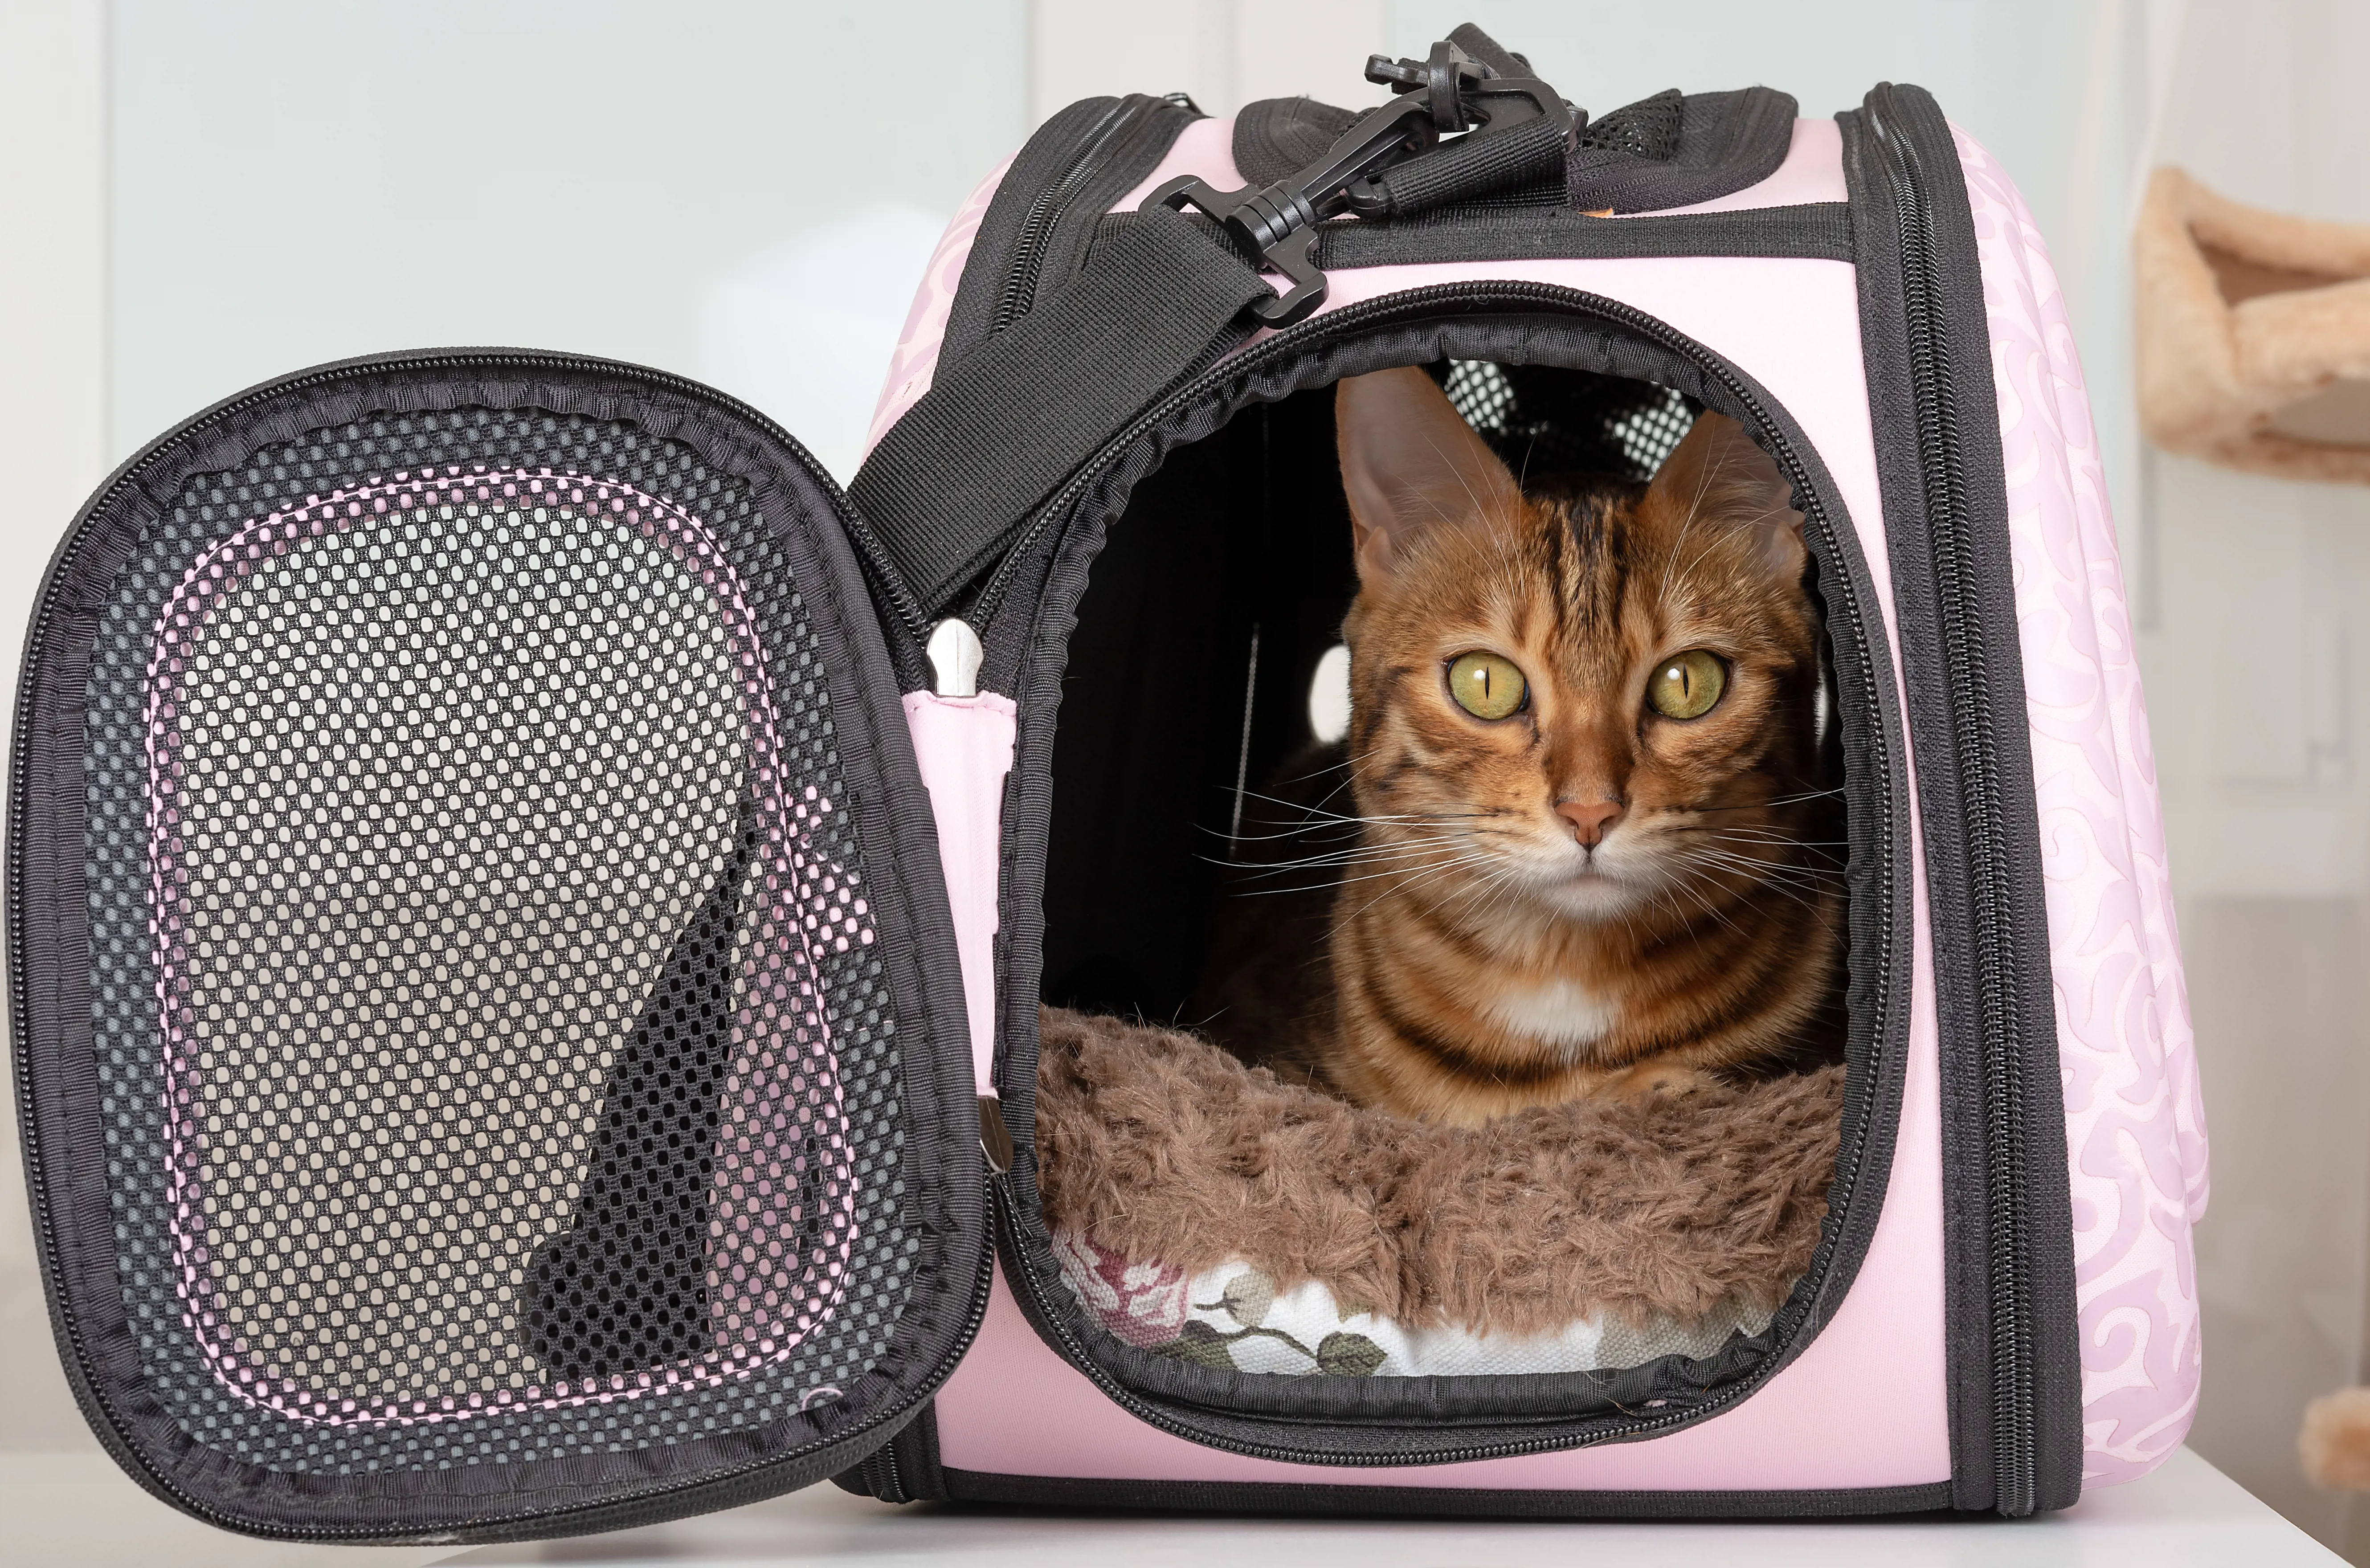 Cat resting in a soft carrier